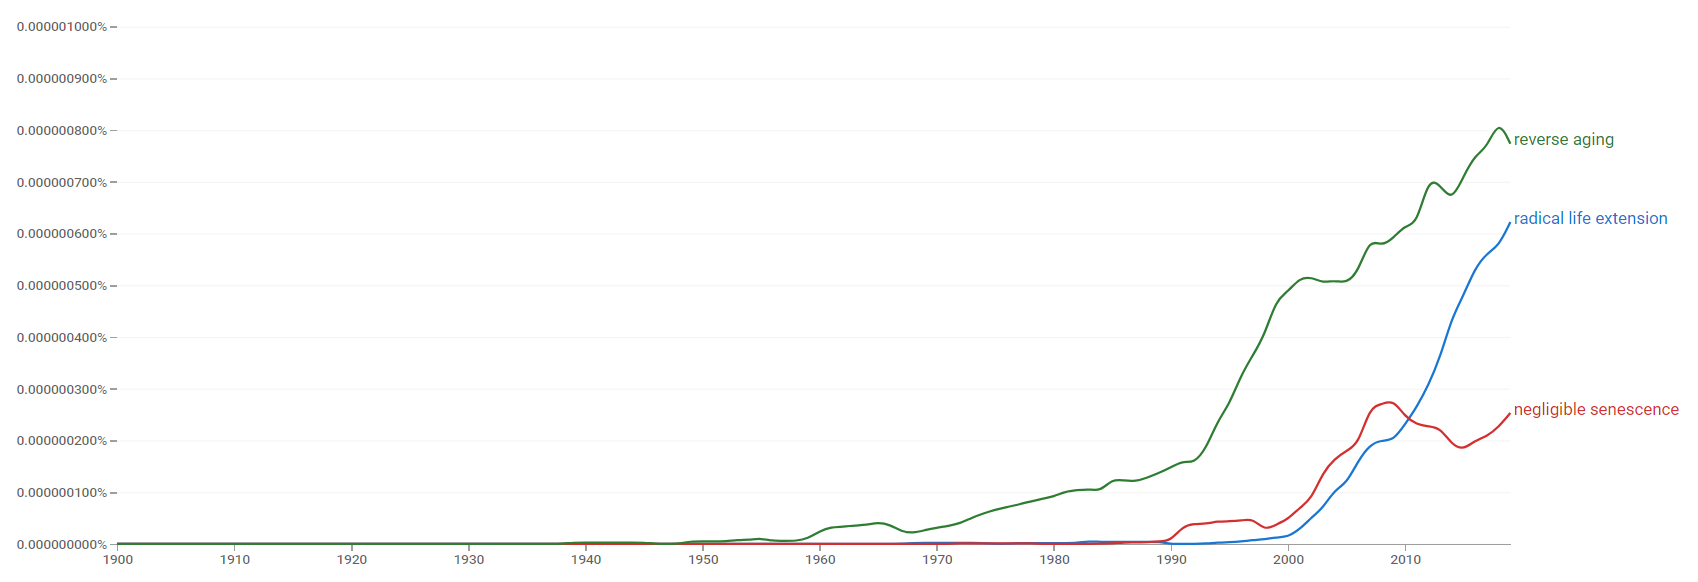 Radical life extension, negligible senescence and reverse aging ngram.png